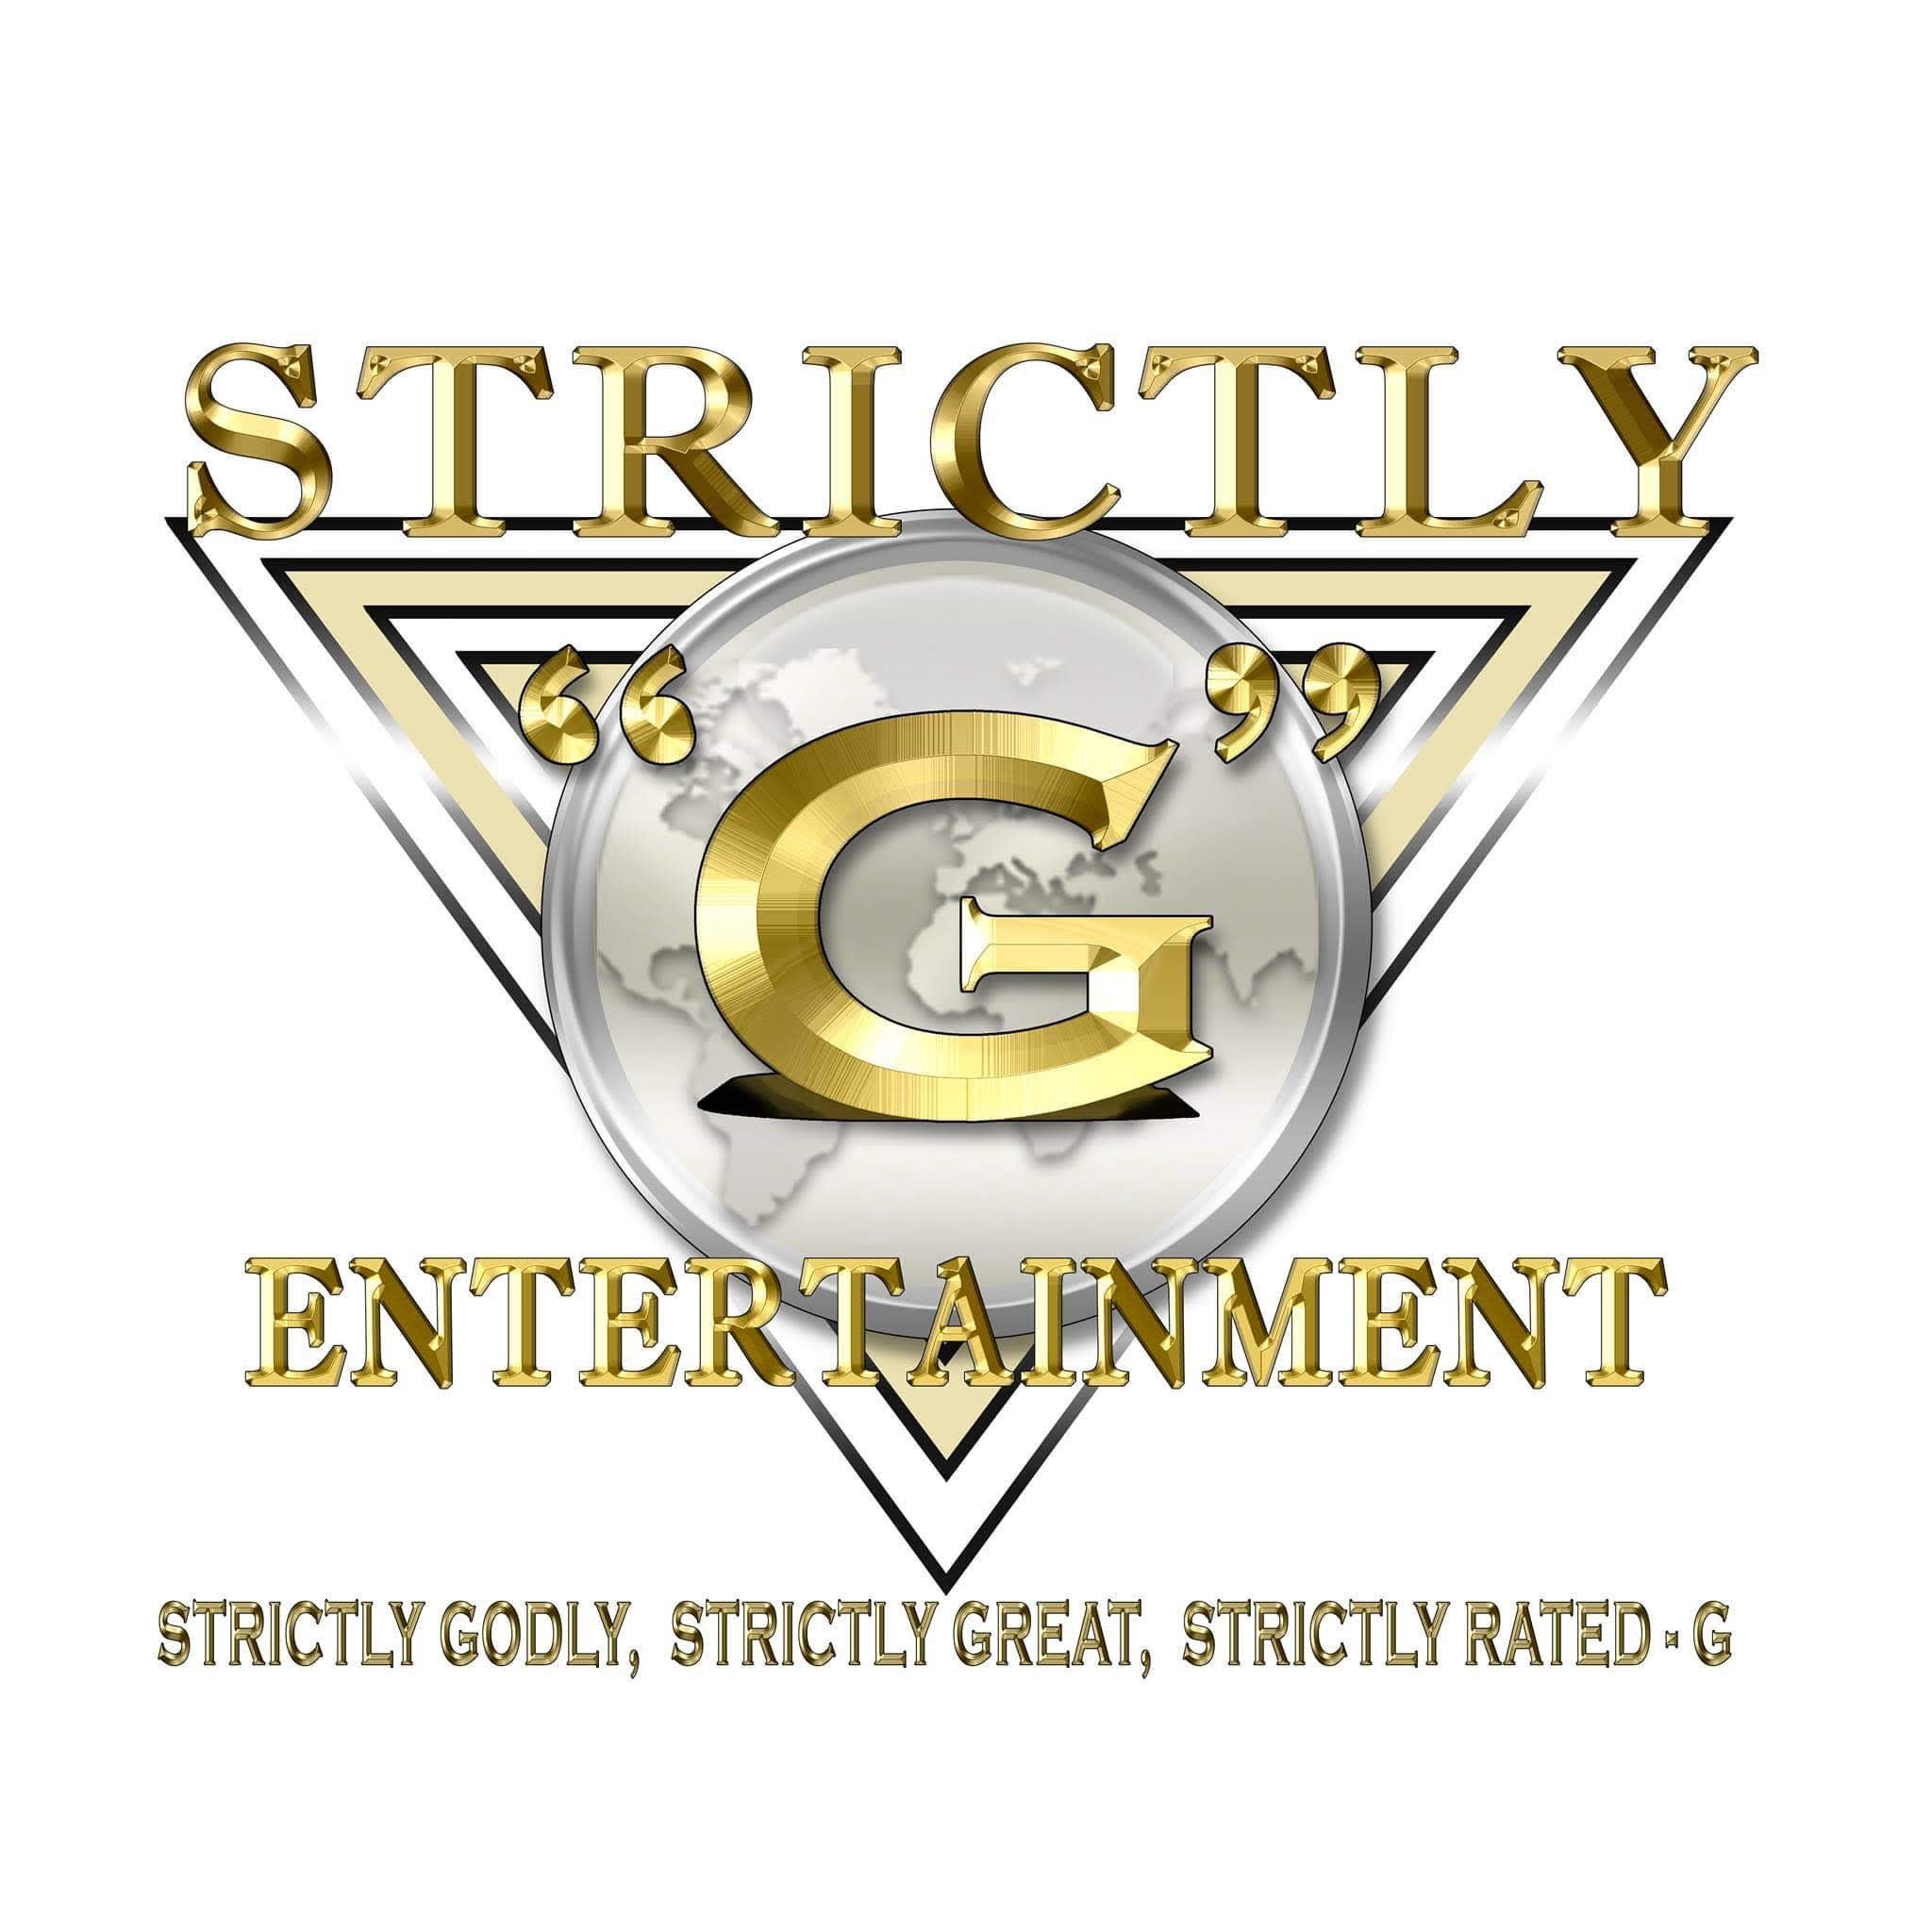 Strictly "G" Entertainment